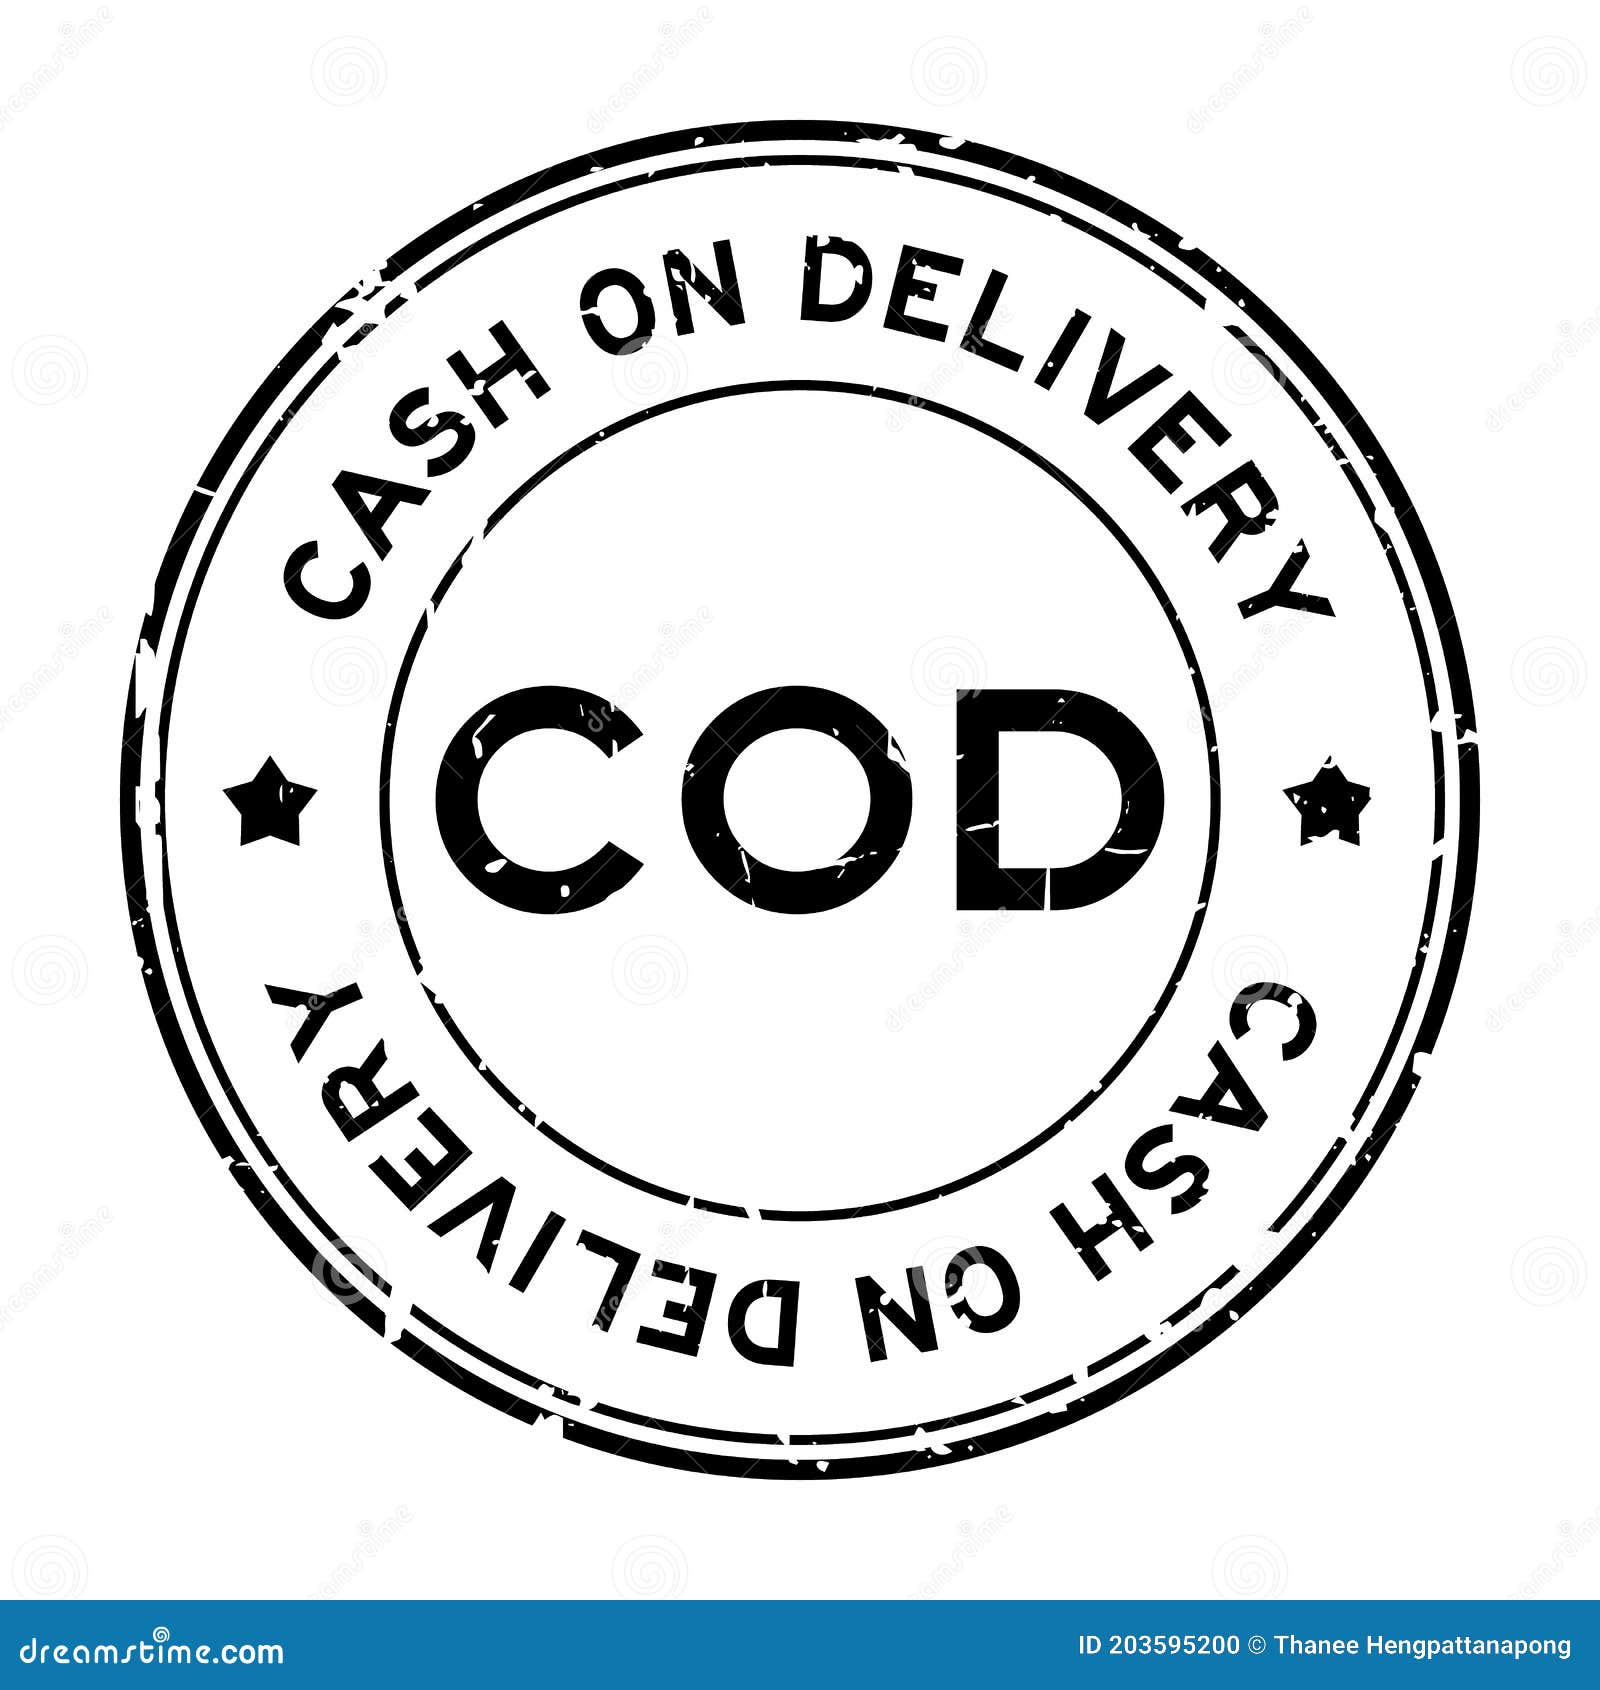 Watch COD(Cash On Delivery) | Prime Video